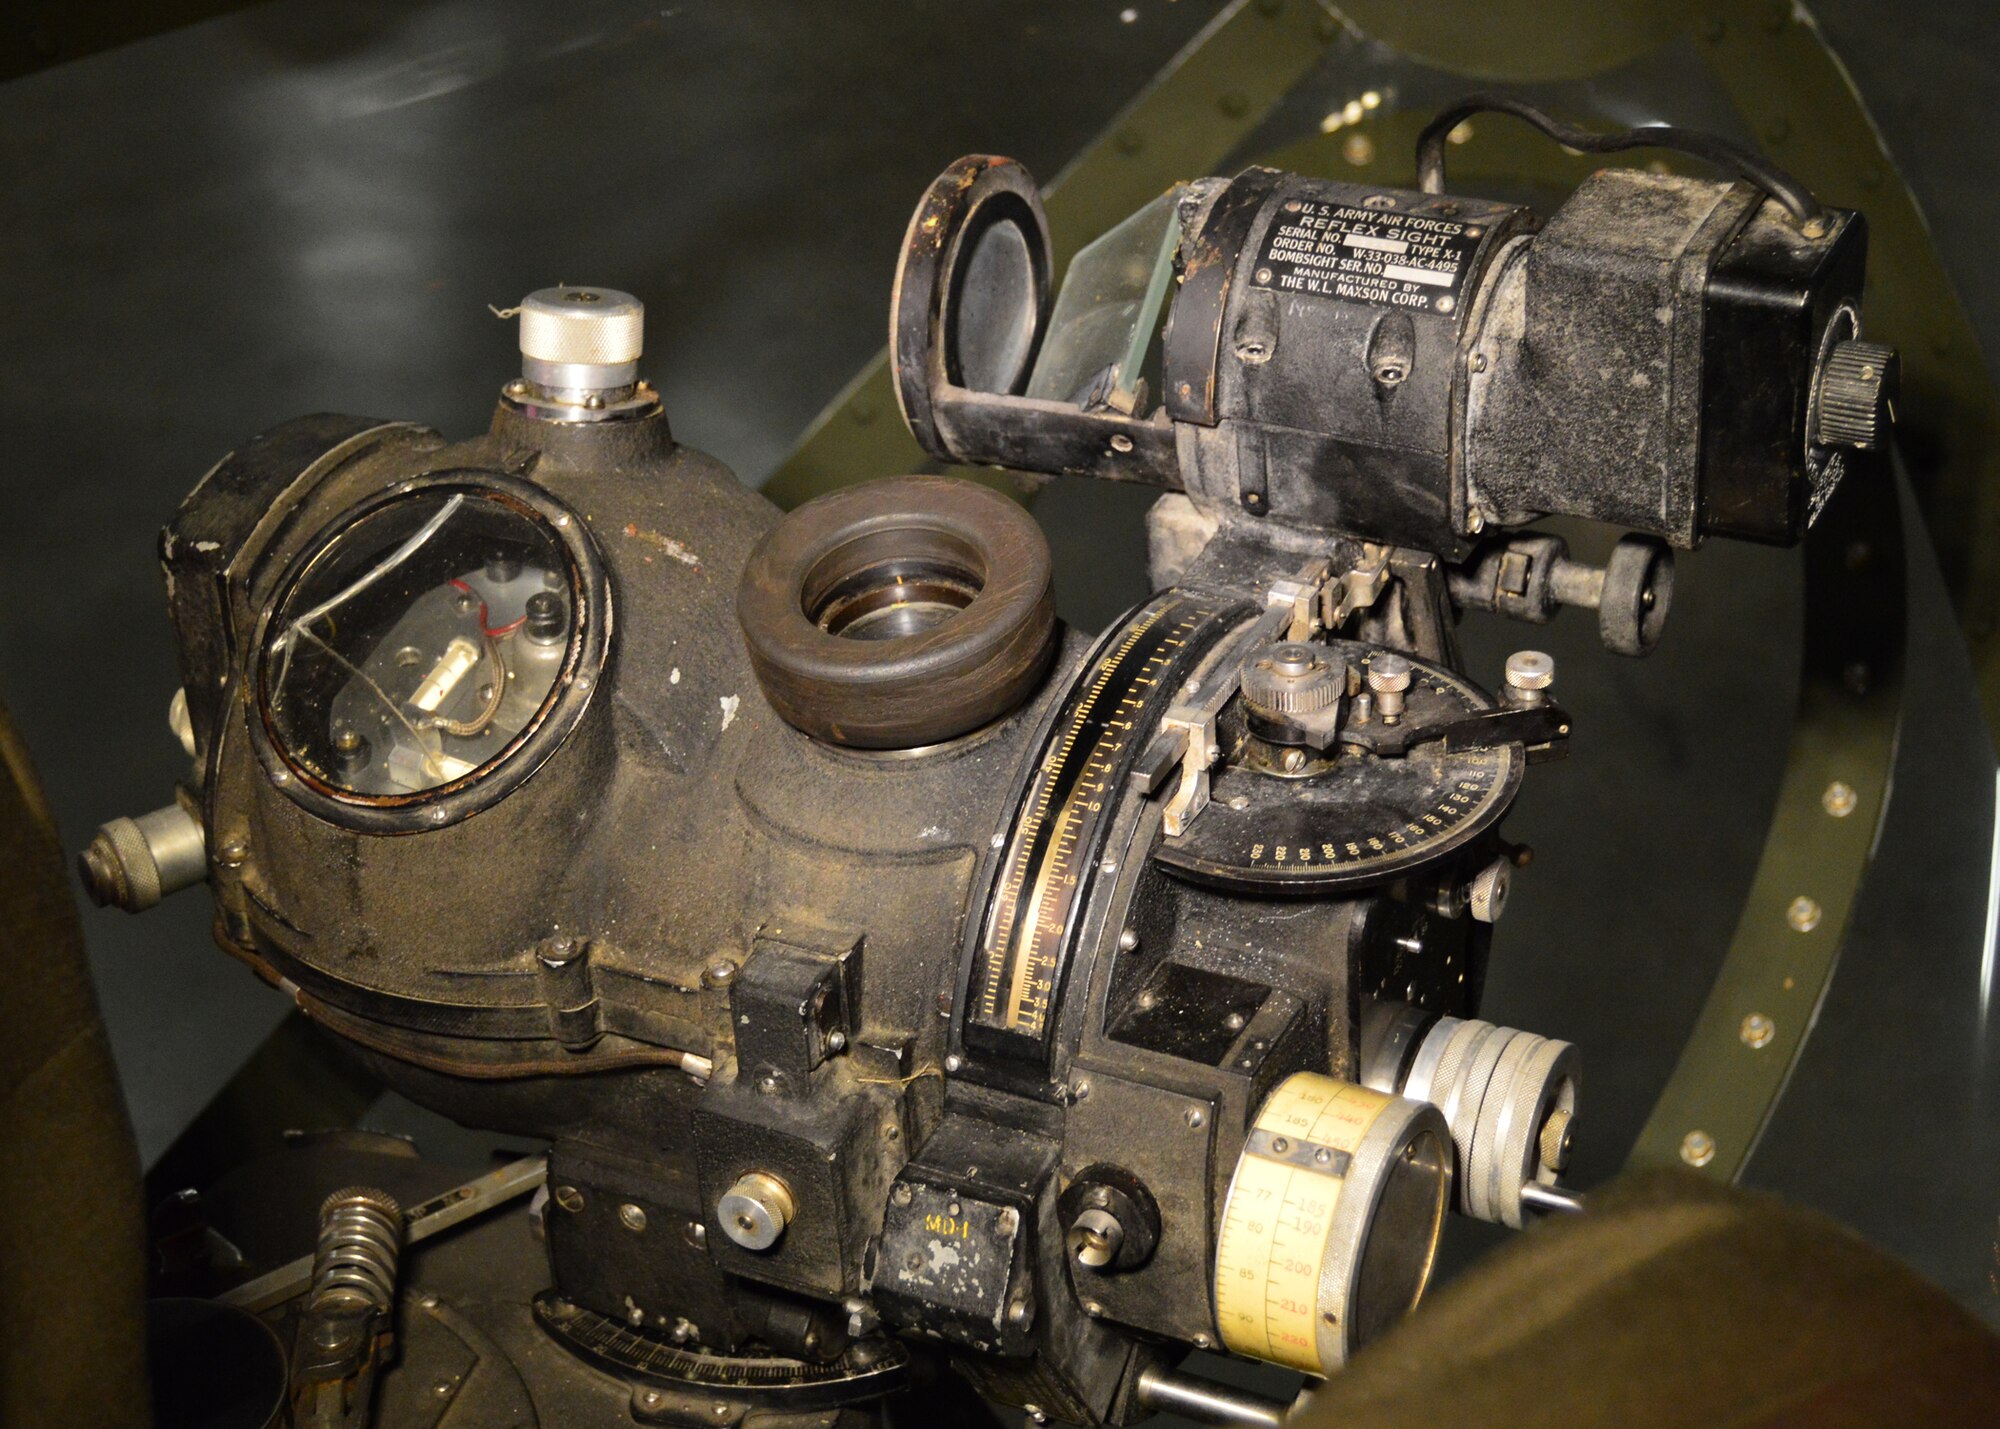 DAYTON, Ohio - Martin B-26G Marauder Norden bomb sight at the National Museum of the U.S. Air Force. (U.S. Air Force photo)